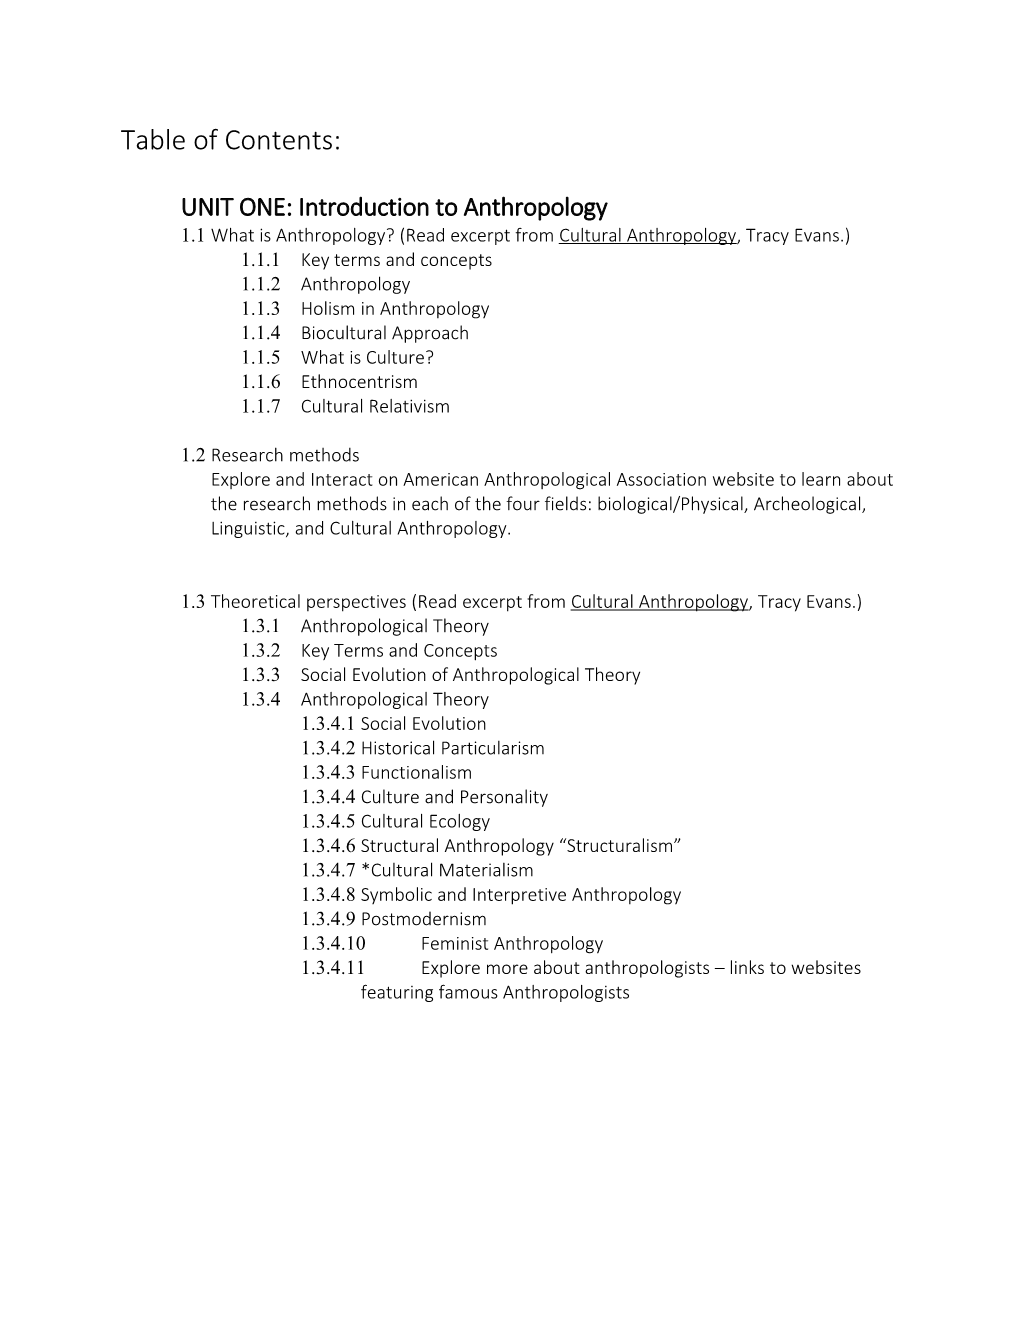 UNIT ONE: Introduction to Anthropology